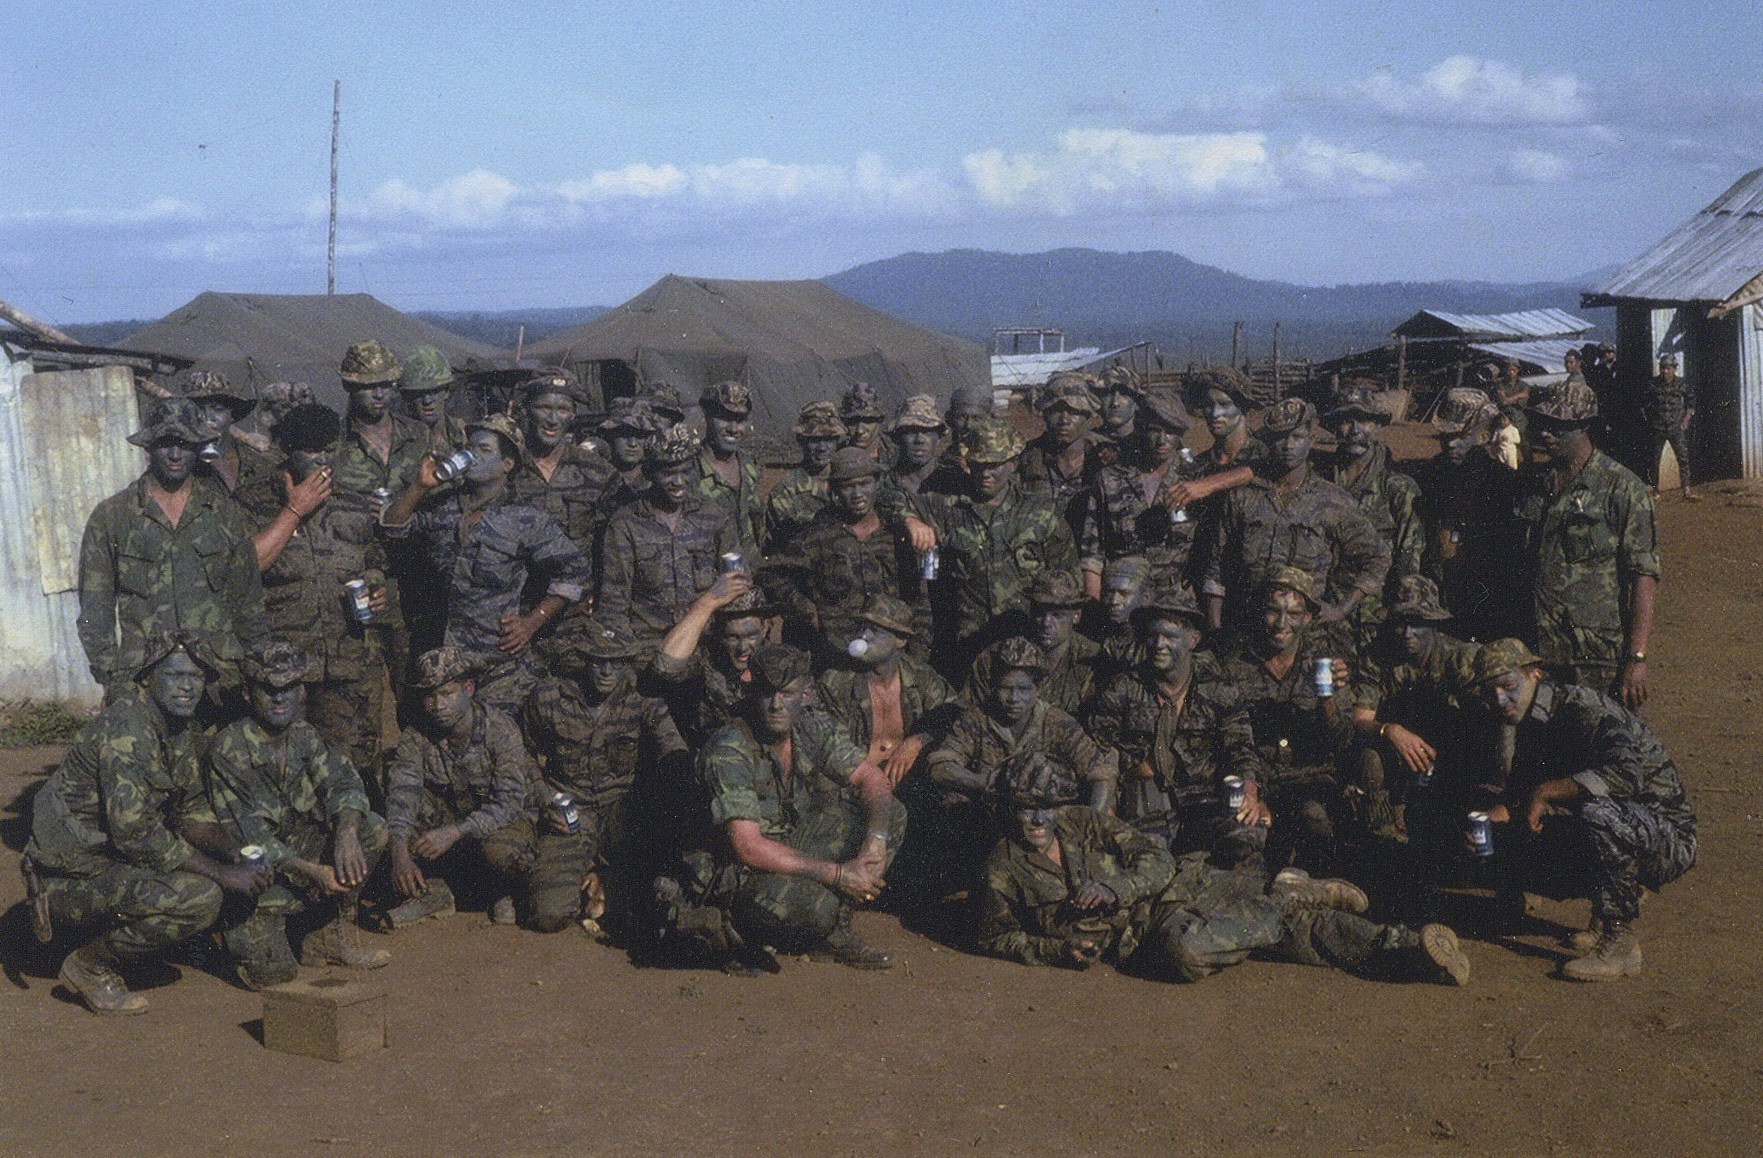 32 A 255 Plei me special forces camp II corps central highlands RVN december 67